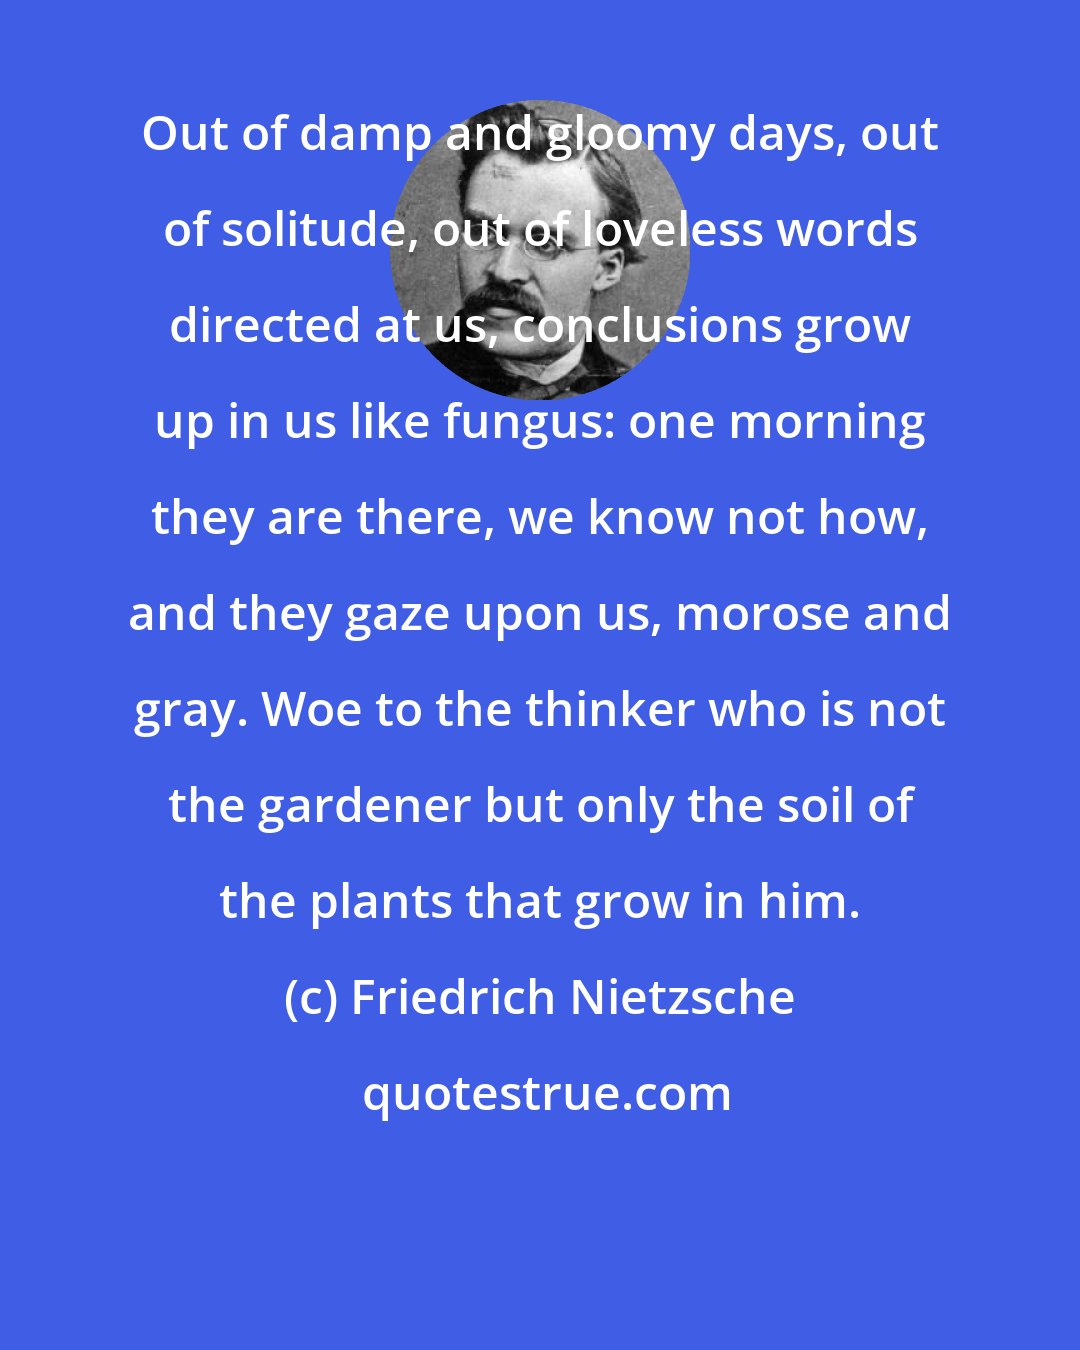 Friedrich Nietzsche: Out of damp and gloomy days, out of solitude, out of loveless words directed at us, conclusions grow up in us like fungus: one morning they are there, we know not how, and they gaze upon us, morose and gray. Woe to the thinker who is not the gardener but only the soil of the plants that grow in him.